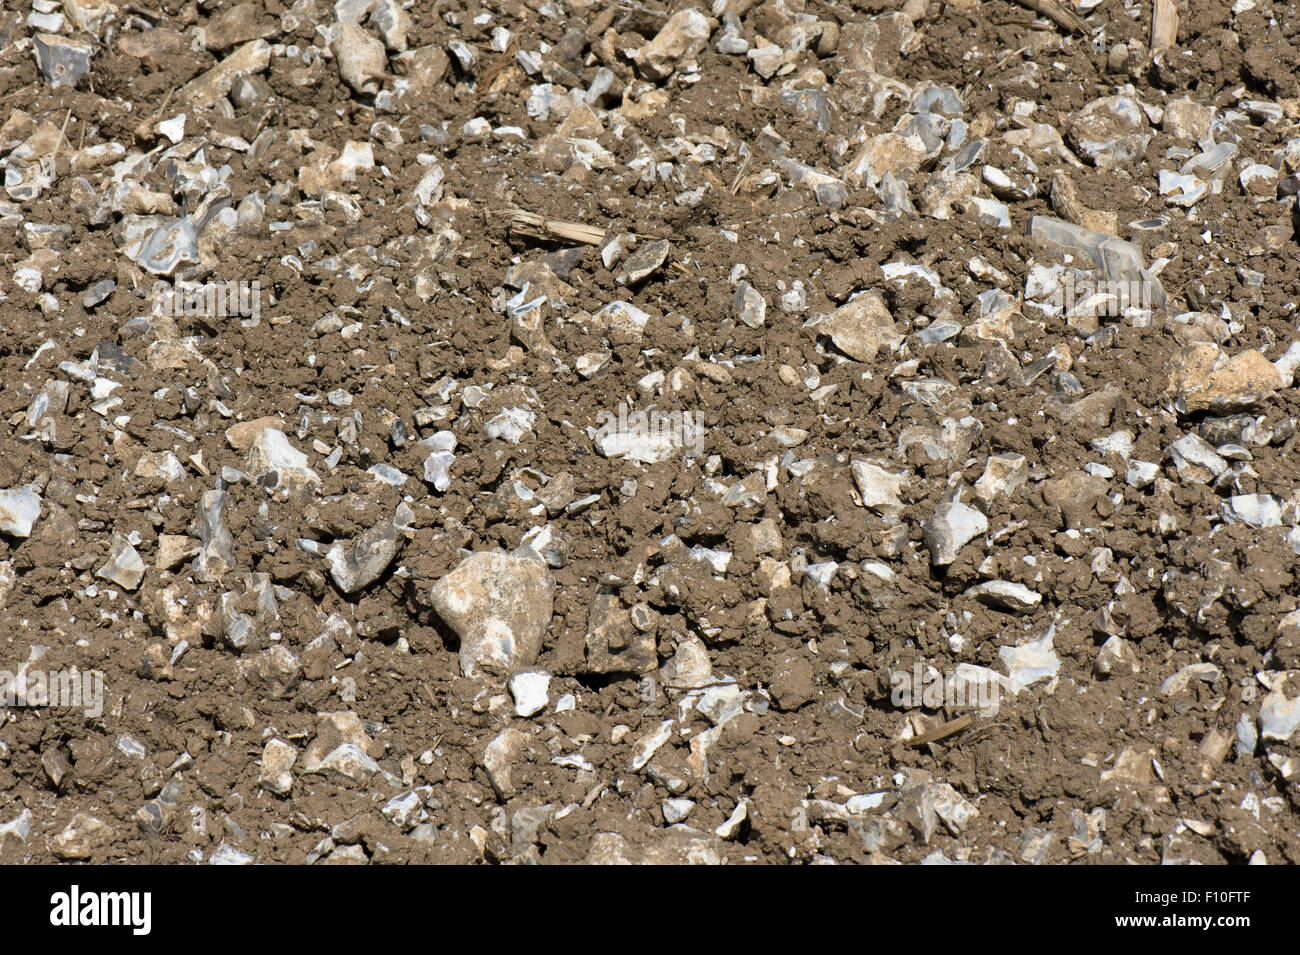 Stony cultivated soil overlying chalk downland with a high proportion of broken flint stones, Berkshire, May Stock Photo